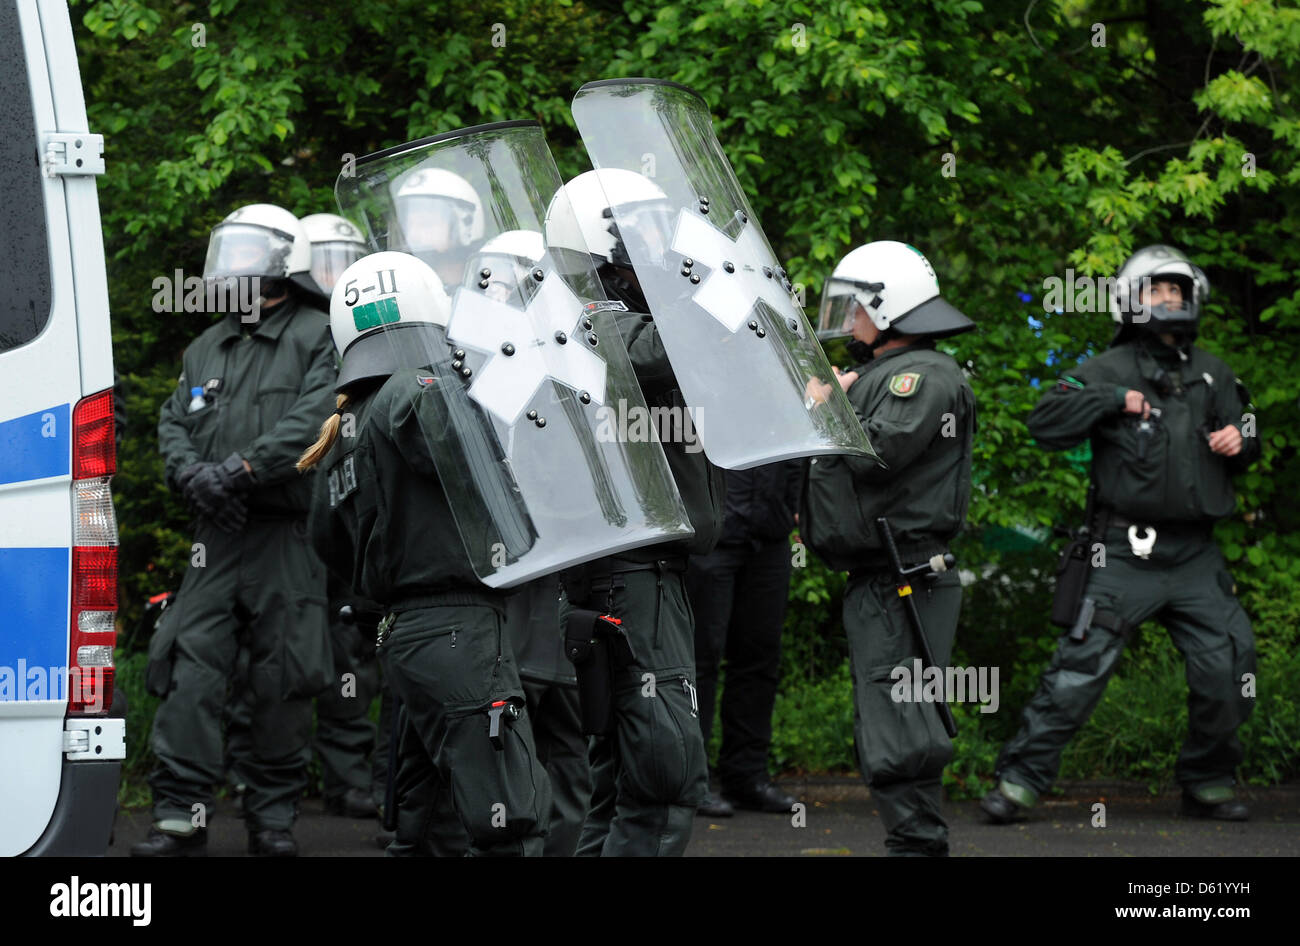 Police officers protect themselves against stone throwers at election campaign rally of the Pro NRW party in front of the King Fahd Academy in Bonn, Germany, 05 May 2012. Repeatedly violence broke out when members of the right-wing party provoked Salafis. 29 police officers were injured during the riots, two suffered knife thrusts. None of them was in mortal danger. Photo: HENNING  Stock Photo